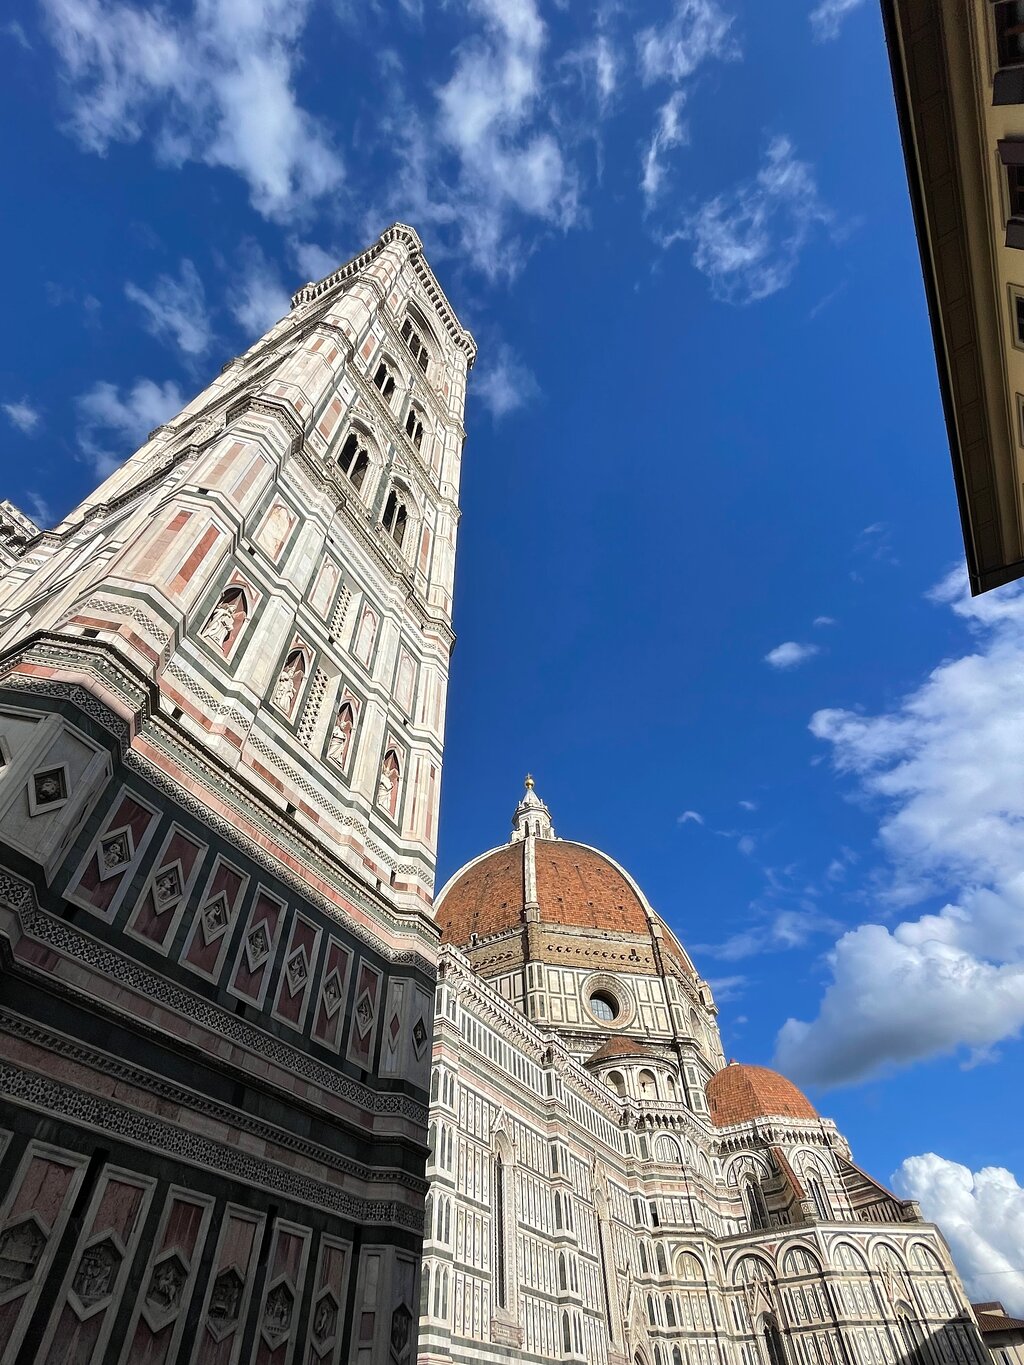 Getting from Livorno to Florence has never been easier with this step by step tutorial. Getting a bus is as convenient as tours and as affordable as trains!